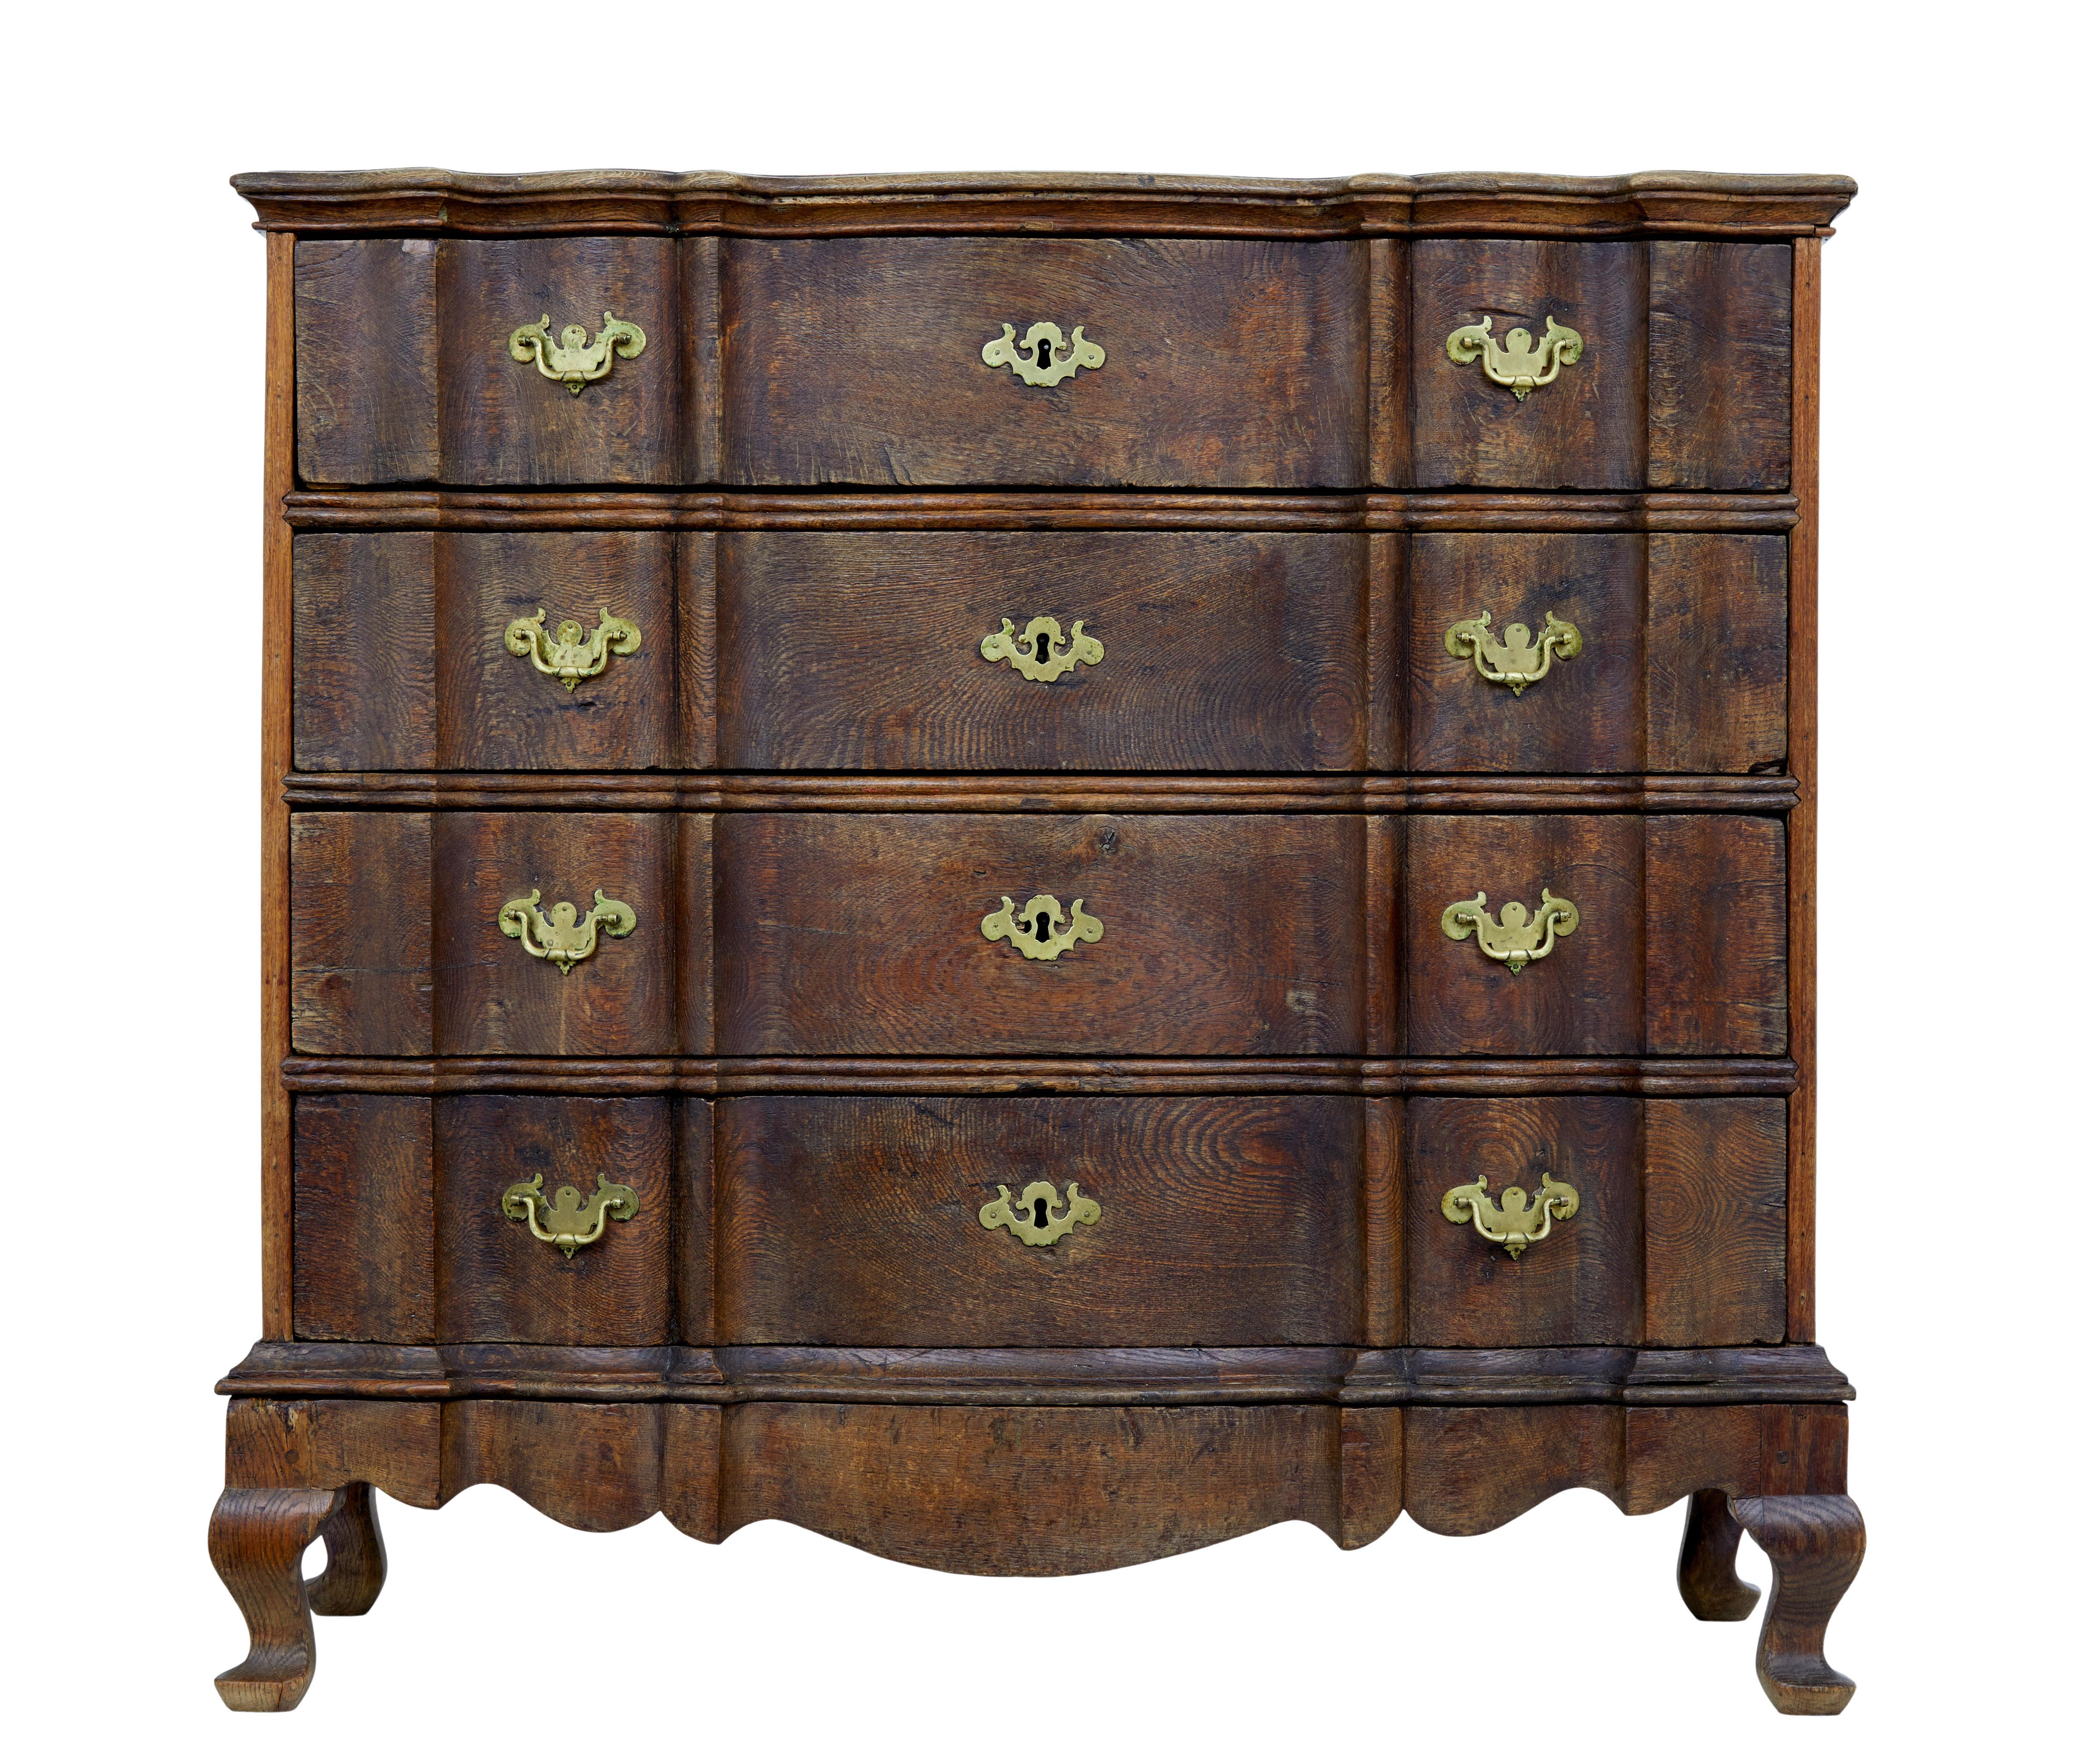 Large and impressive mid-19th century danish commode, circa 1840.

Solid oak construction, comprising of 2 parts with the main body sitting on a separate base. Fitted with 4 drawers with shaped drawer fronts. Each fitted with brass